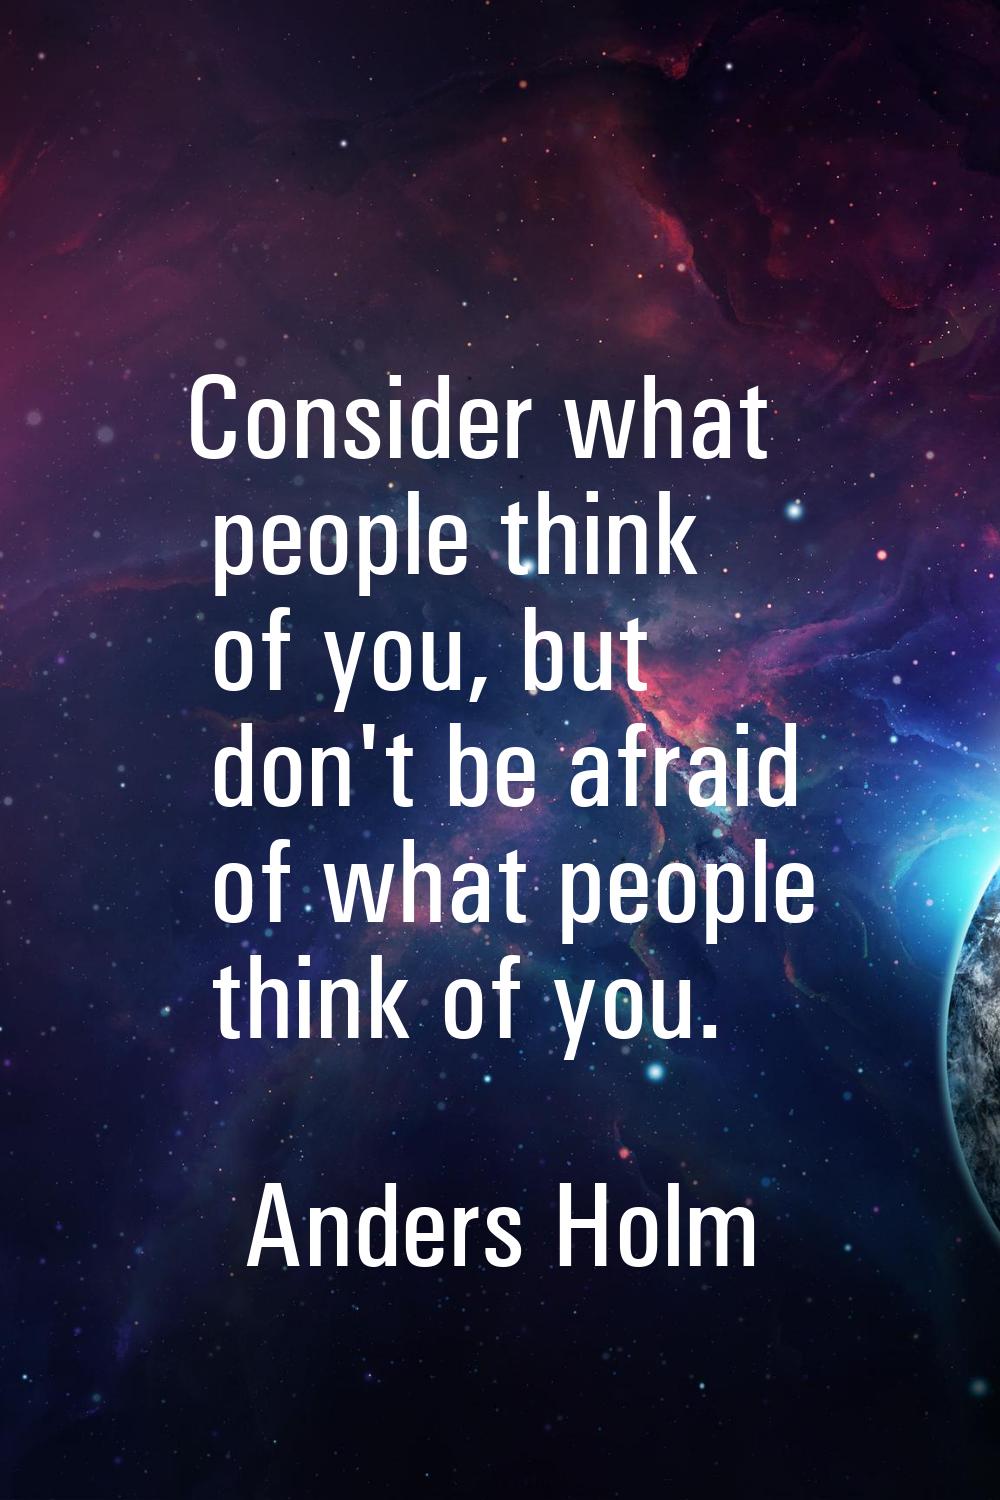 Consider what people think of you, but don't be afraid of what people think of you.